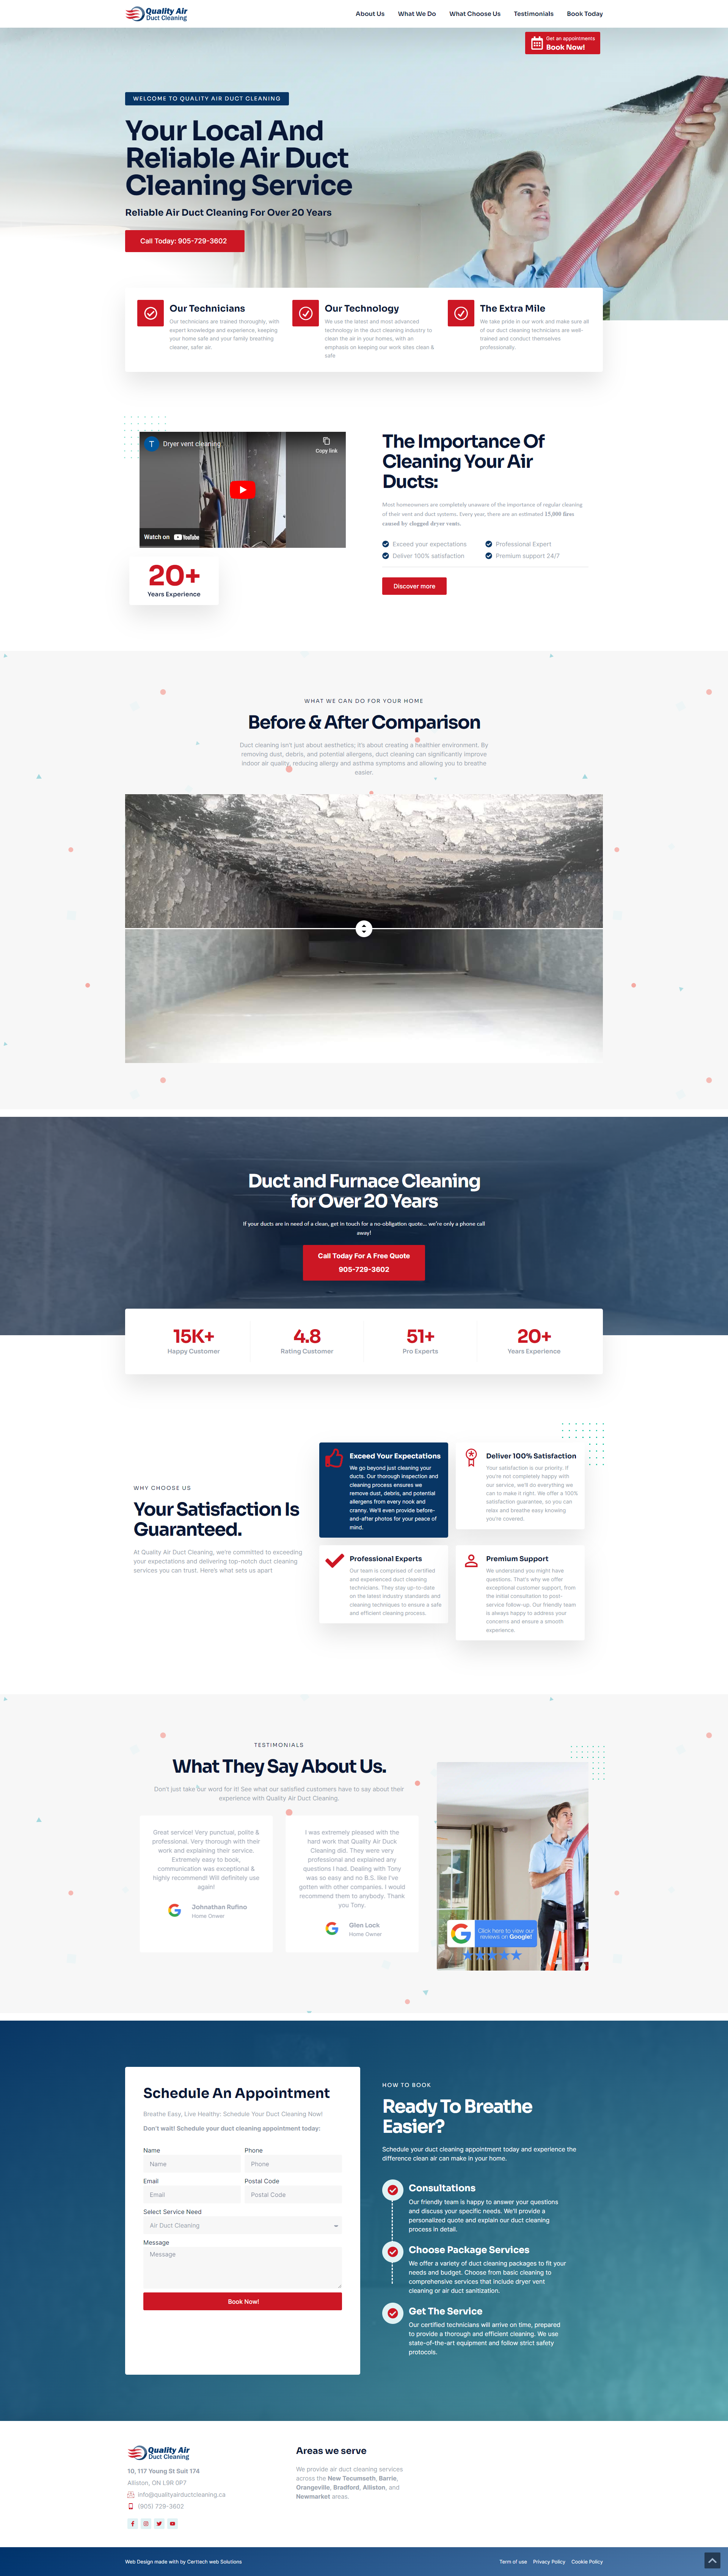 A screenshot of a webpage offering local and professional duct cleaning services, featuring information about services, customer testimonials, and a comparison image of before and after quality air ducts cleaning.